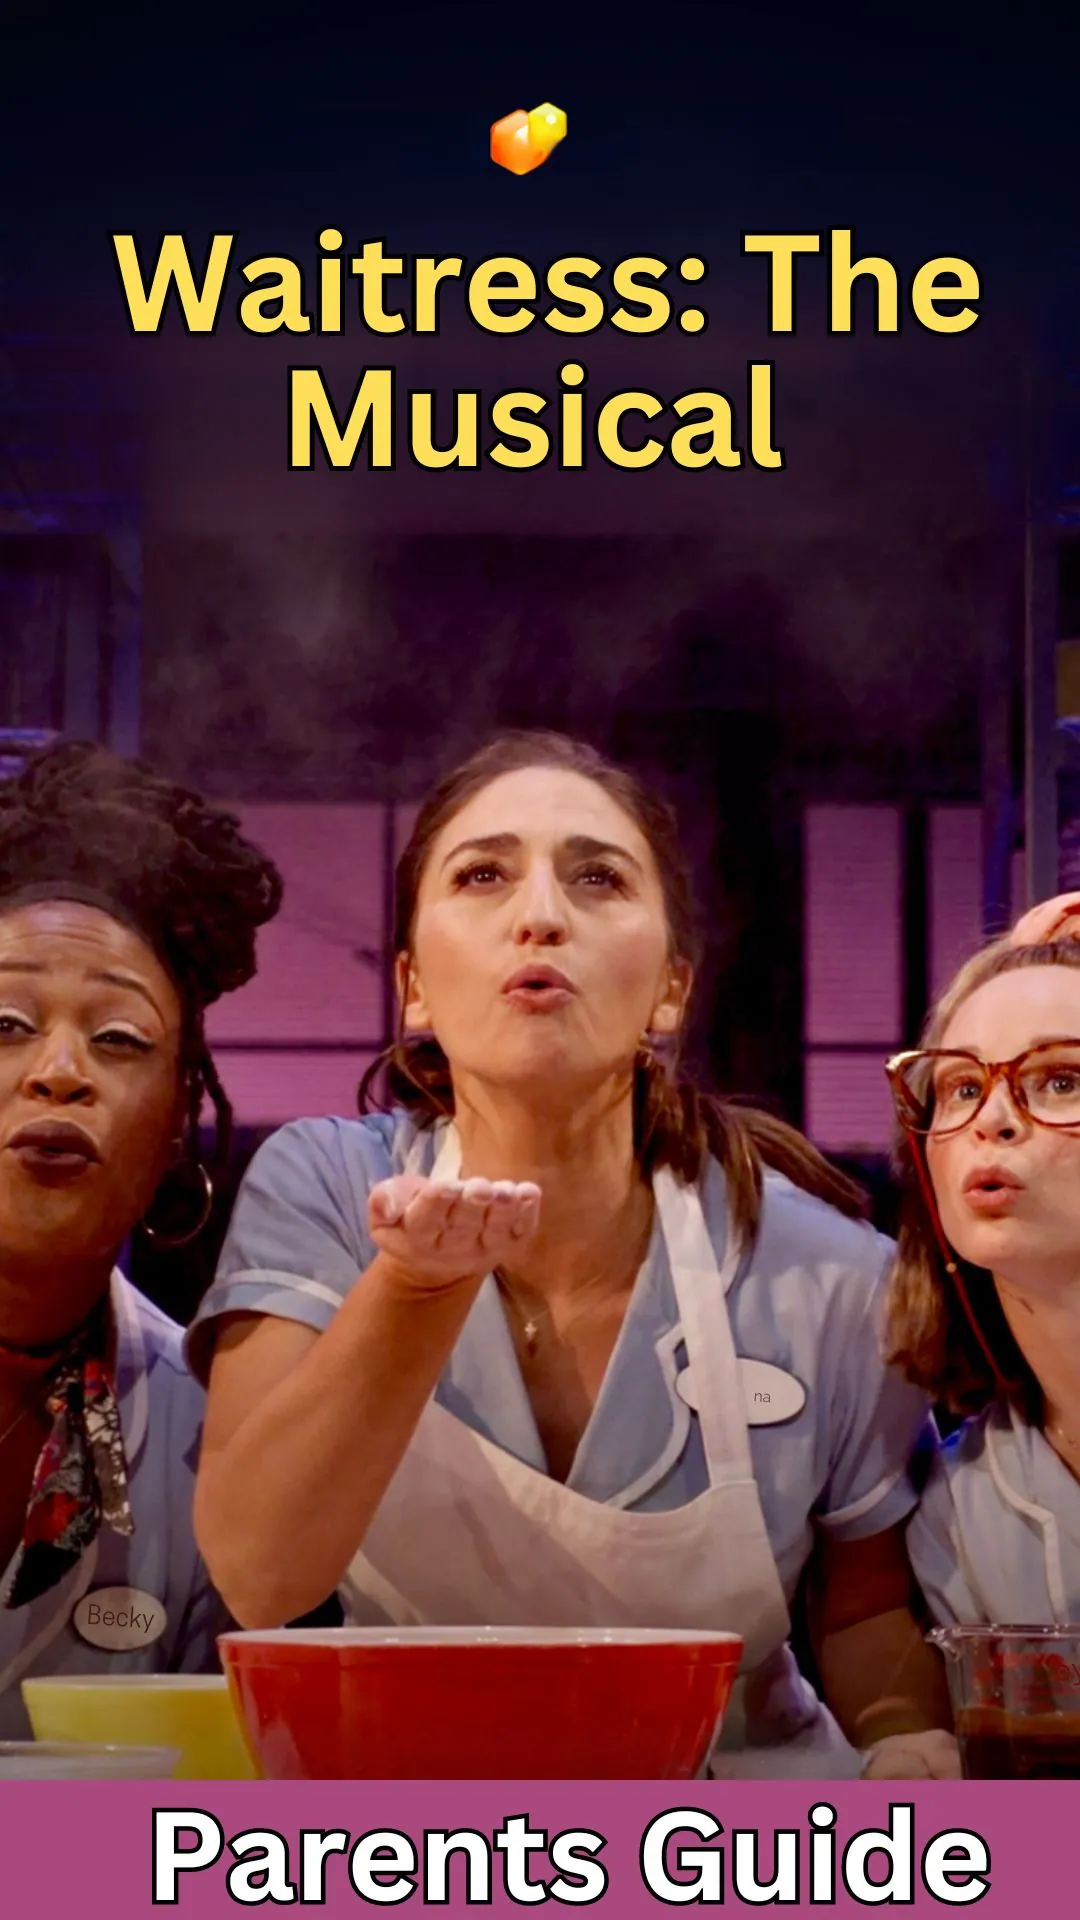 Waitress The Musical Parents Guide (1)